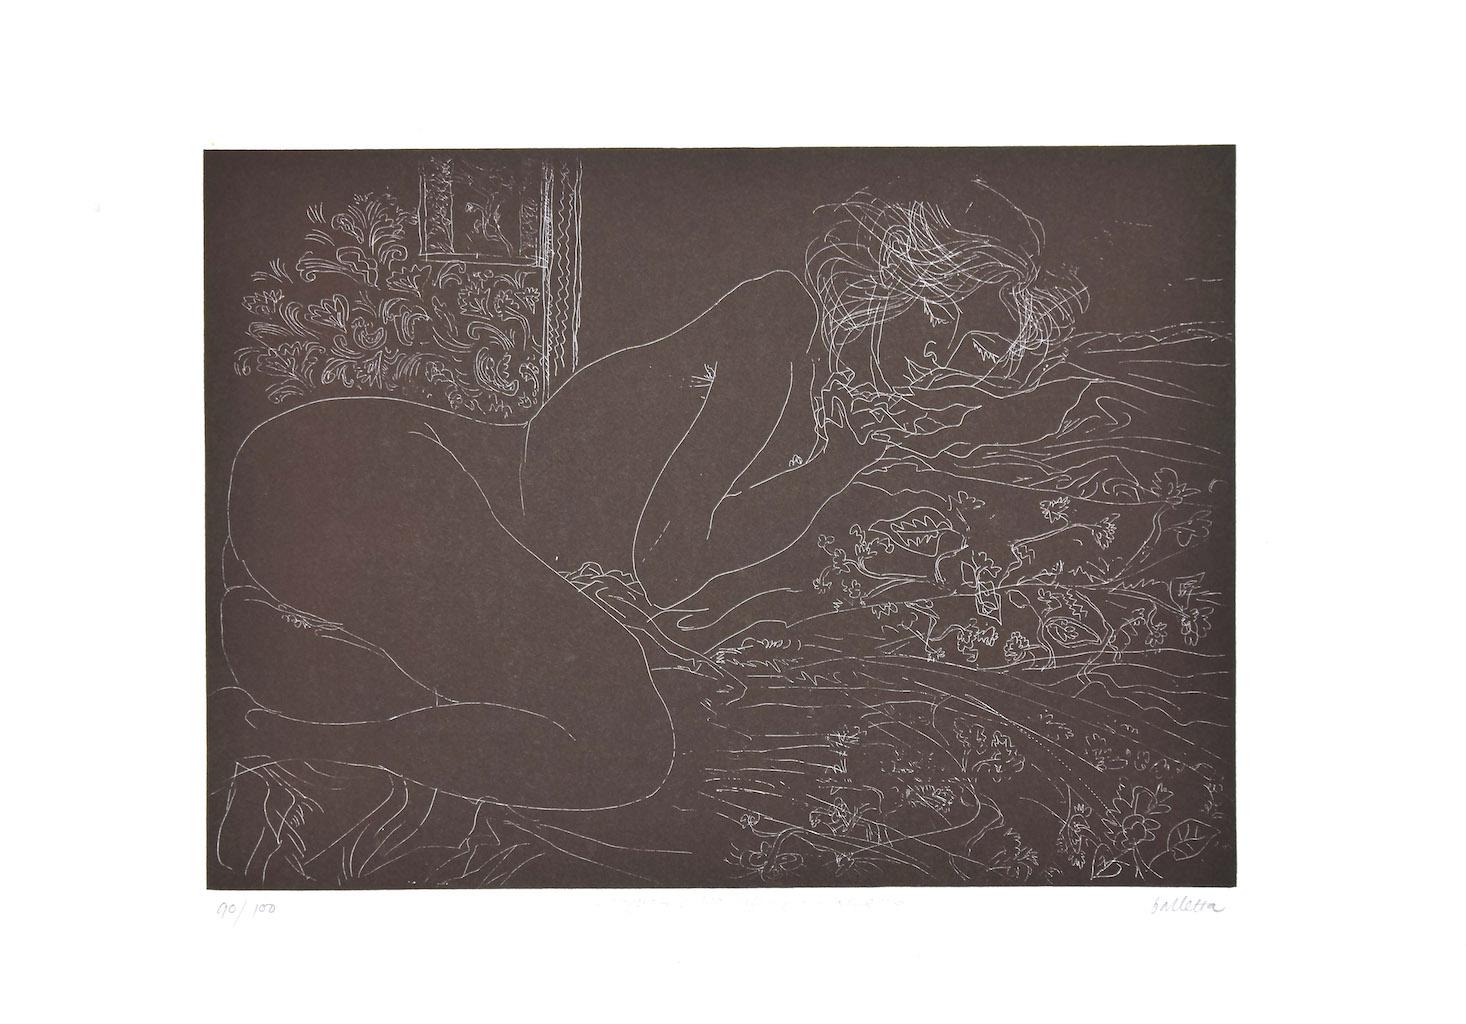 Nude is an original etching realized by Sergio Barletta. 

Hand-signed on the lower right in pencil.  numbered on the lower left, edition. 90/100.

In very good conditions.

Sheet Dimension: 35 x 50 cm.

The artwork represents a laying nude through